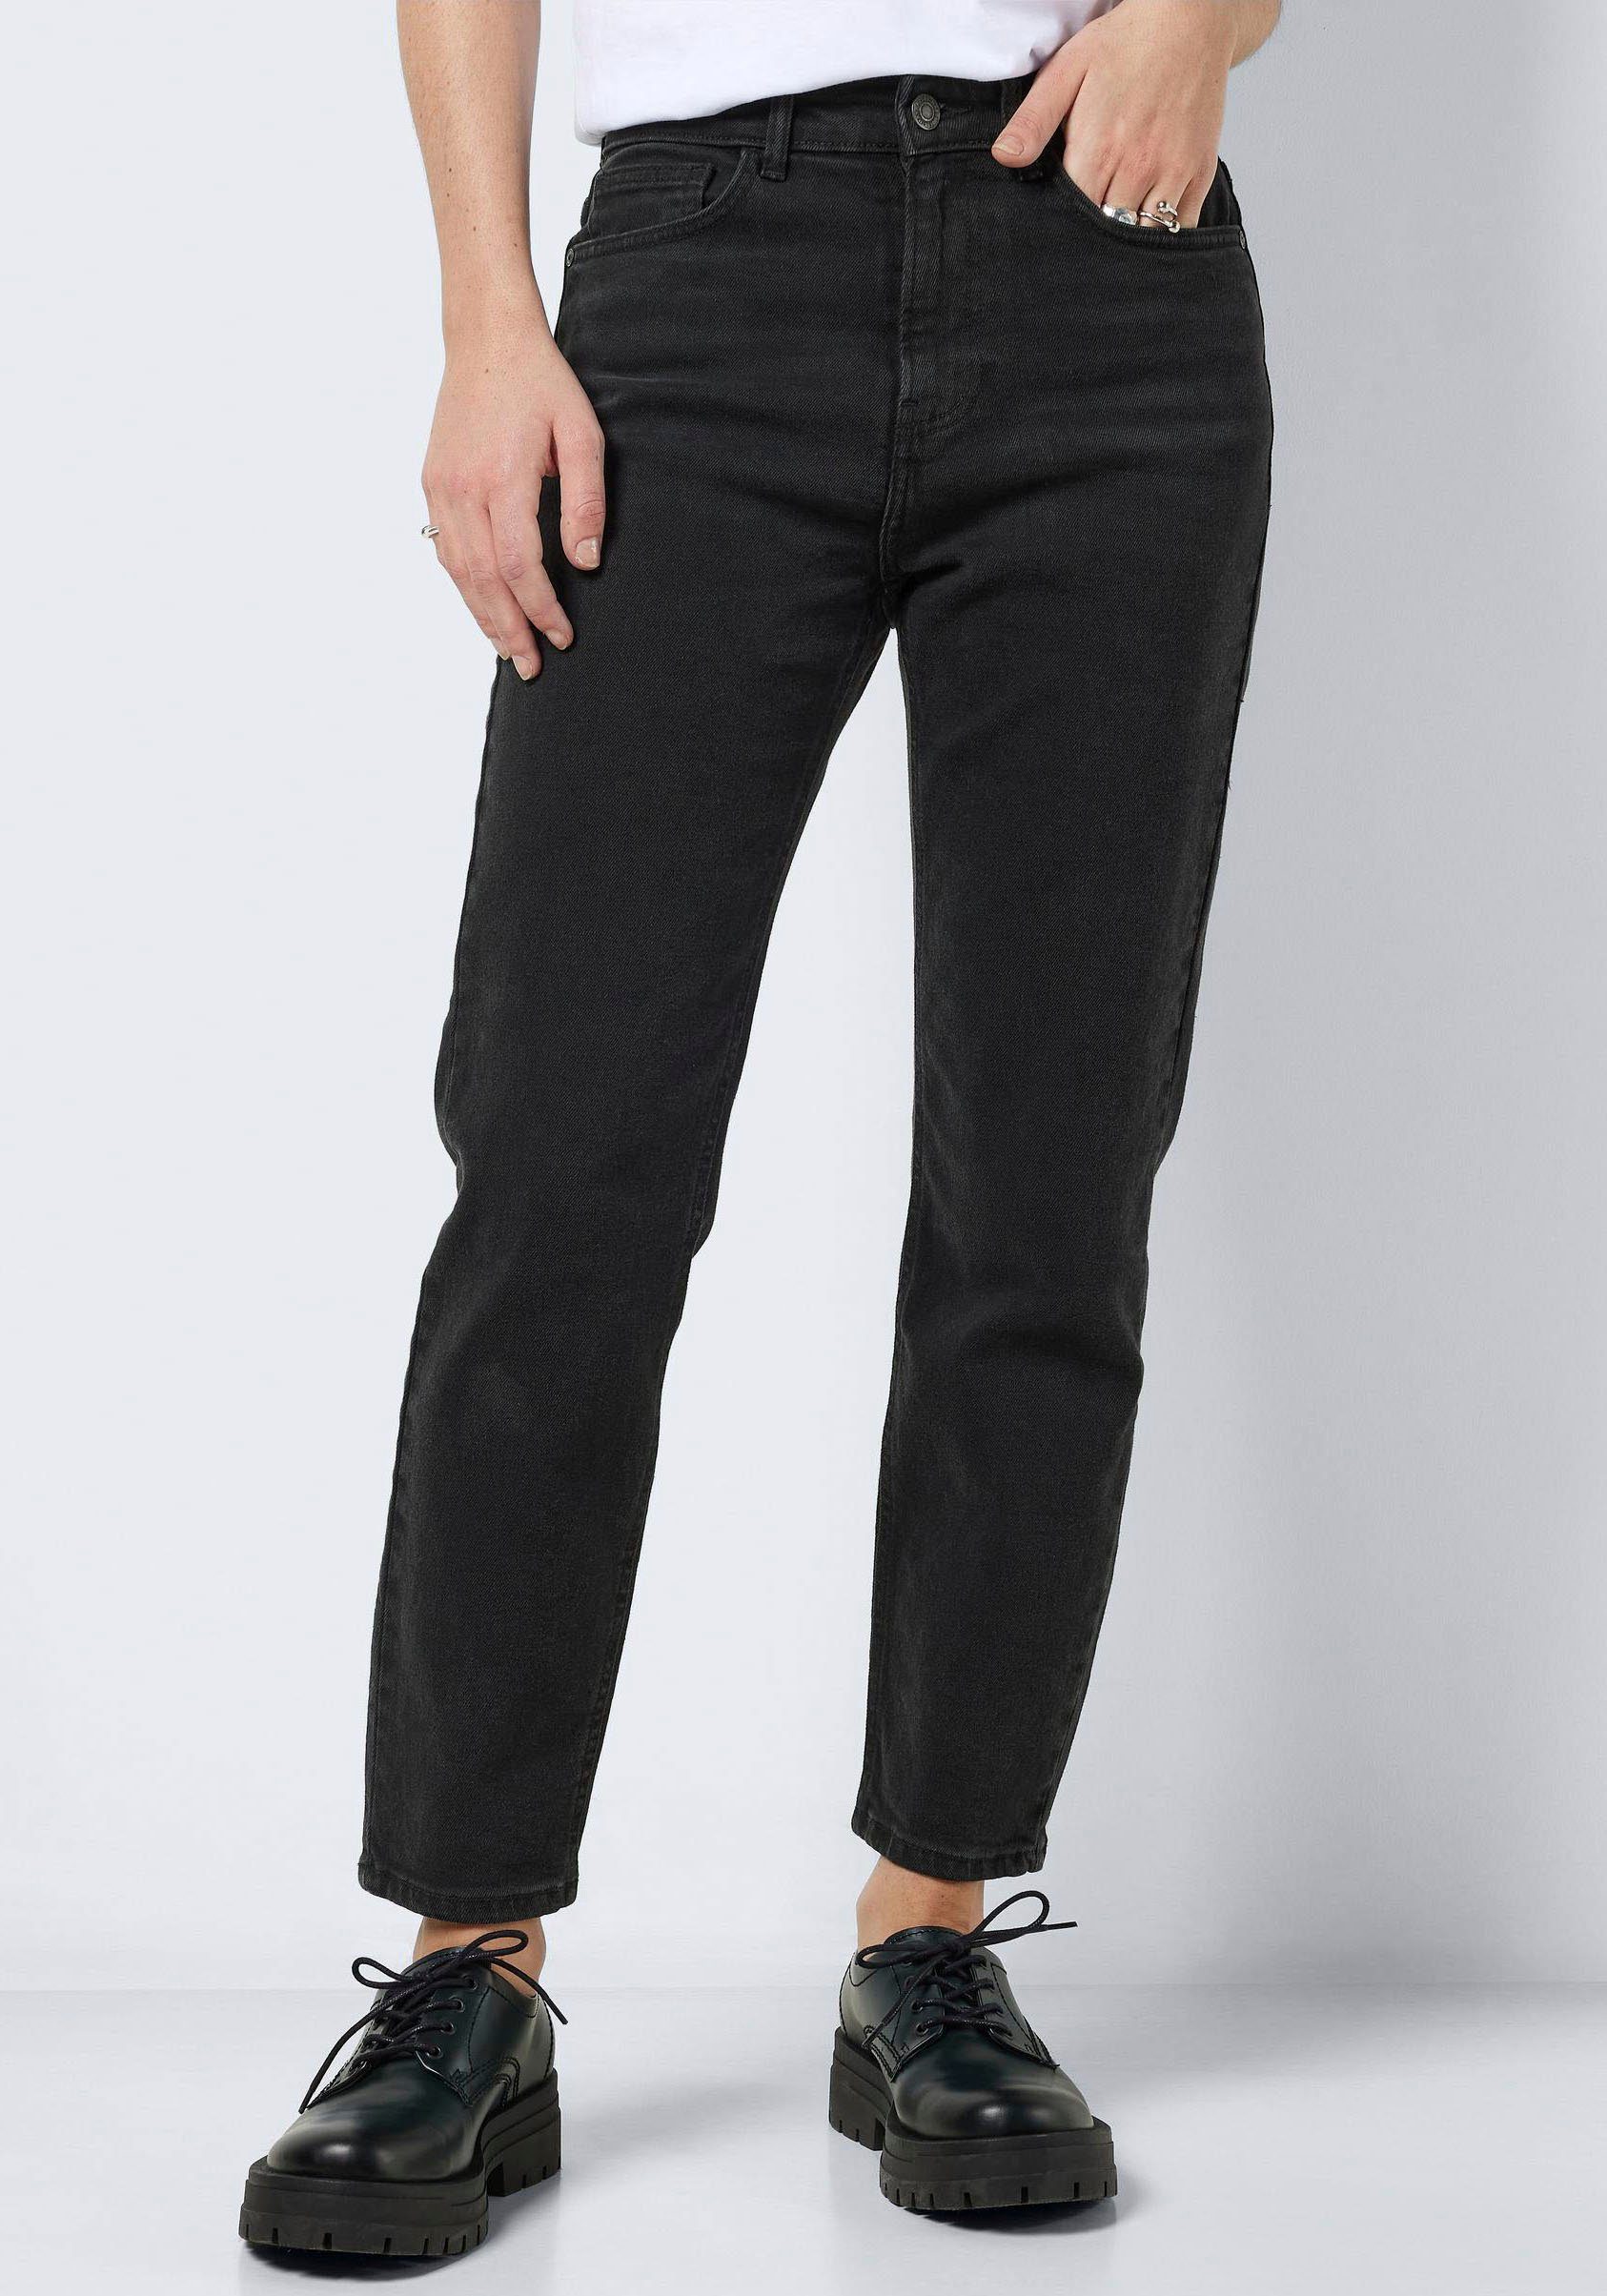 ANK Straight-Jeans mit BLACK may offenem Noisy HW Saum NOOS JEANS NMMONI STRAIGHT